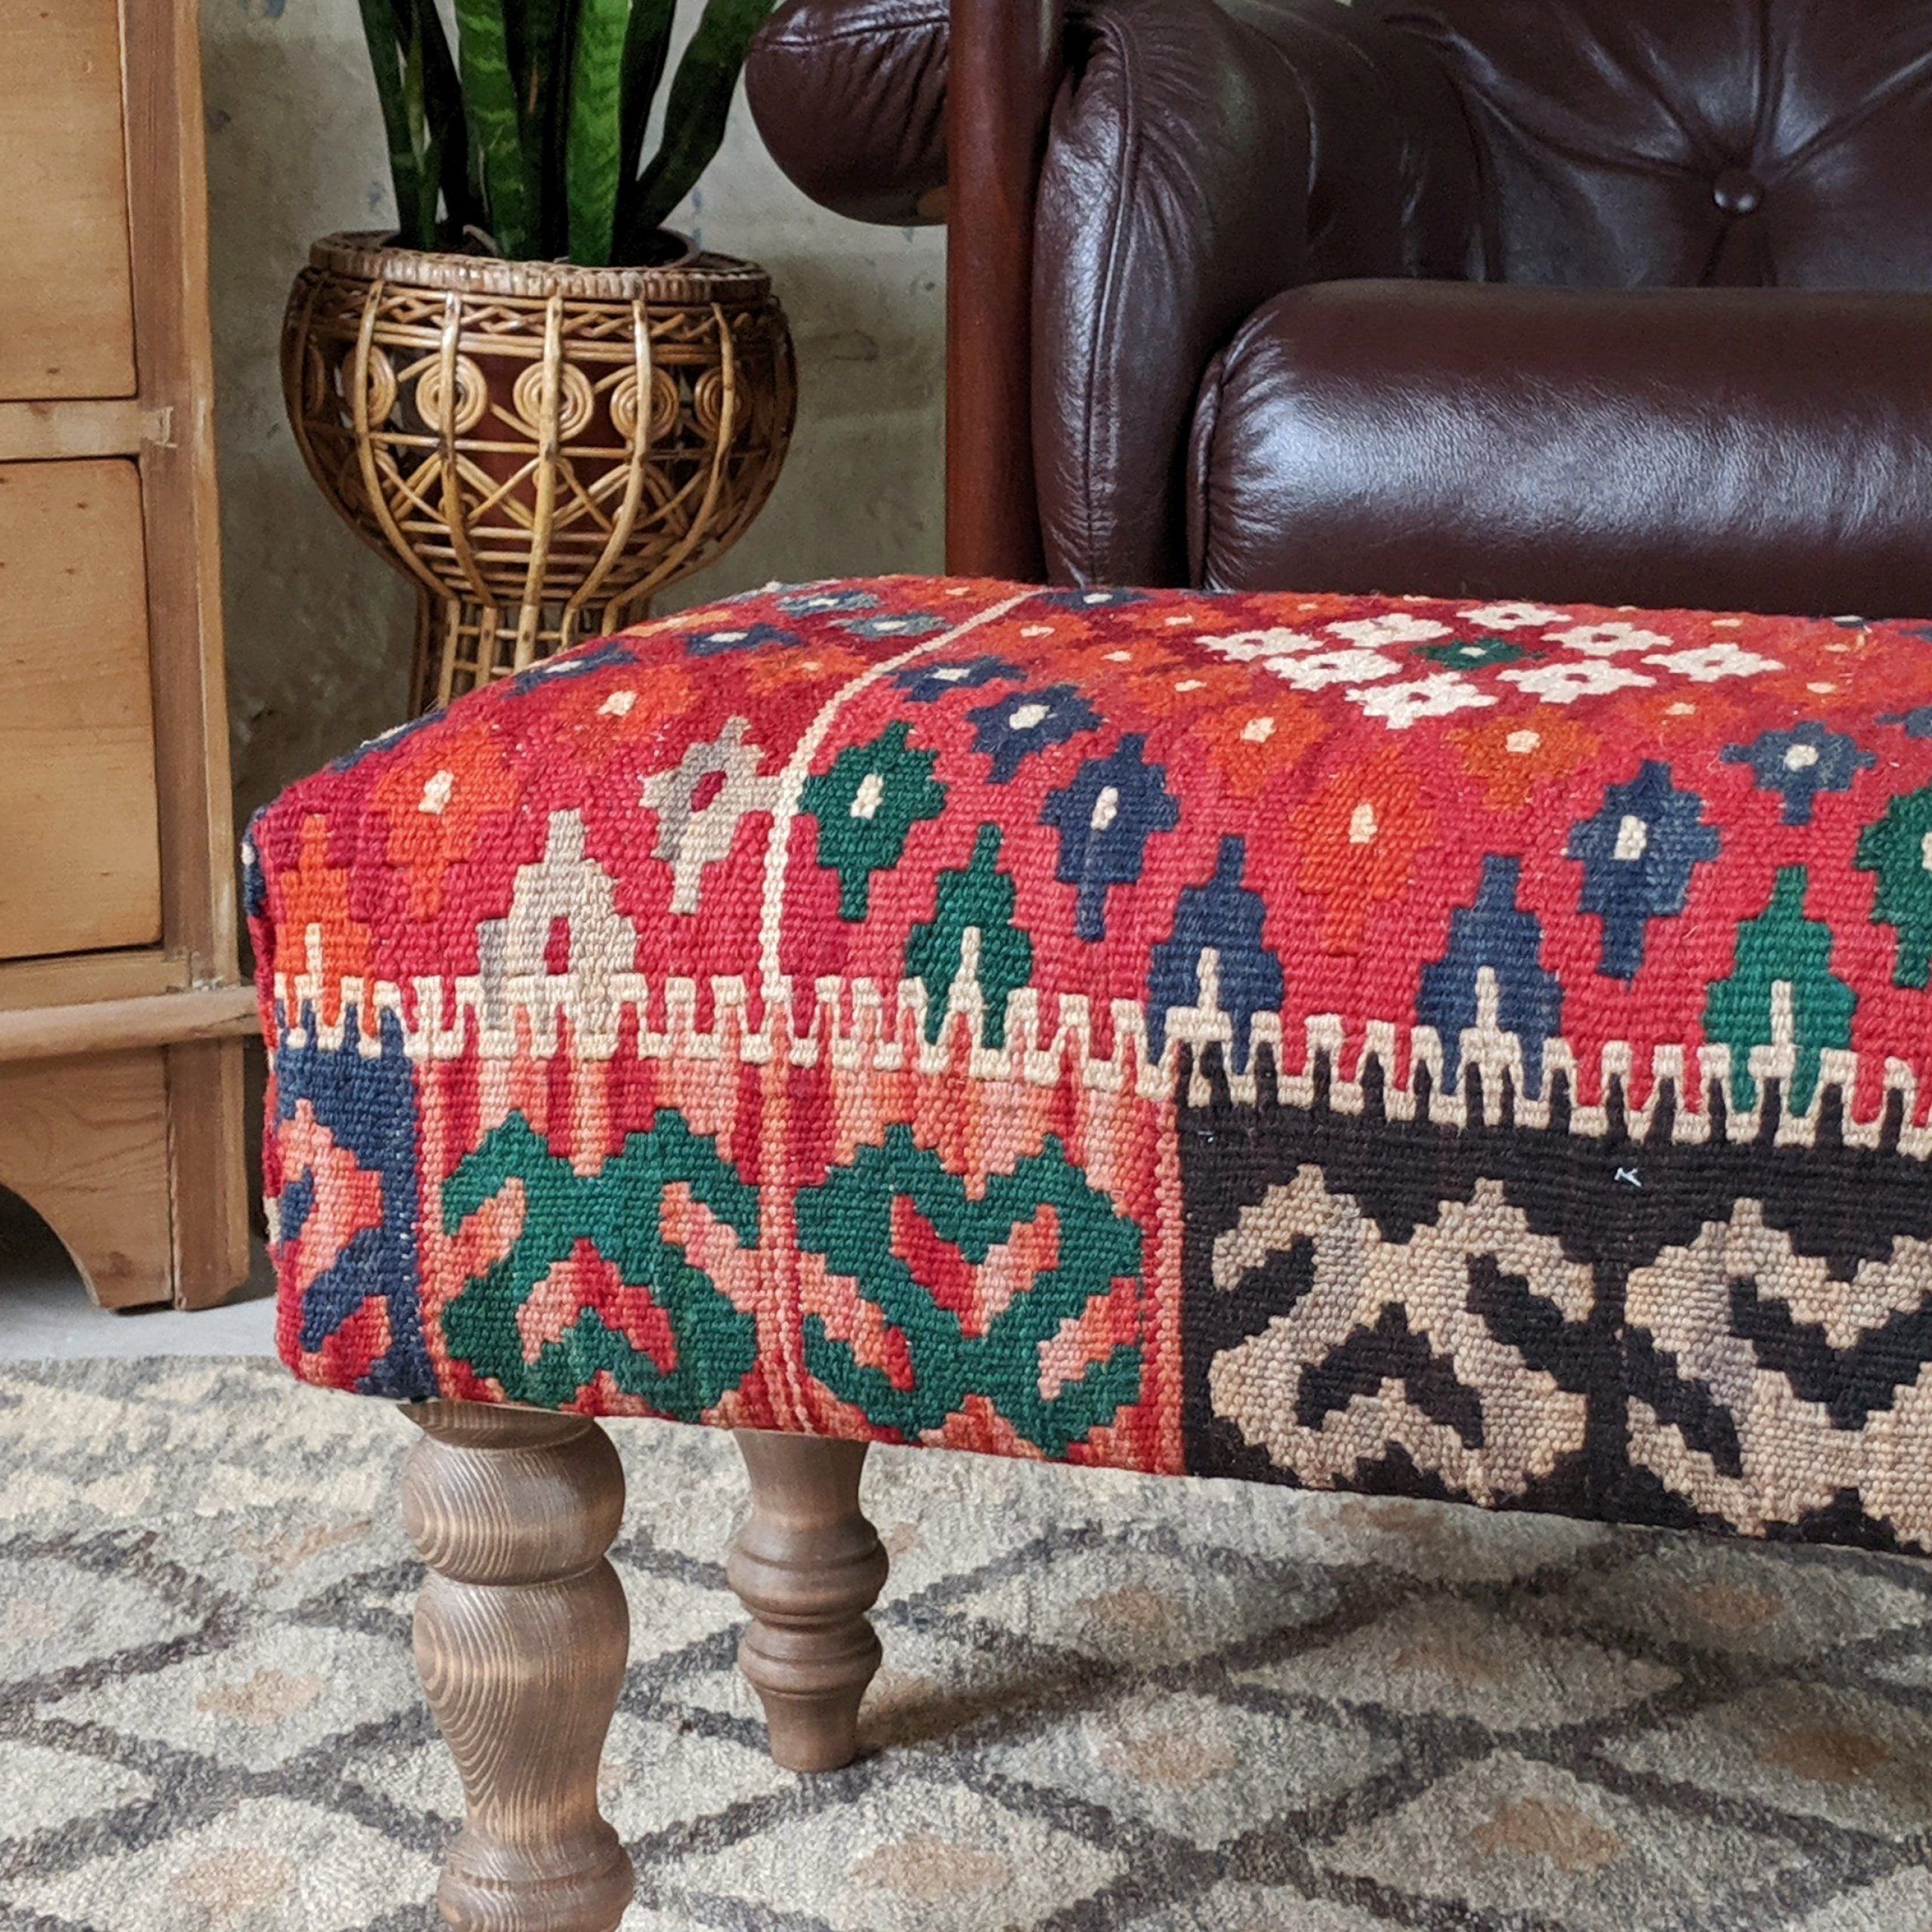 Most Popular Kilim Footstool – Handmade Red Kilim Wool Rug Ottoman Stool On Turned For Stone Wool With Wooden Legs Ottomans (View 7 of 10)